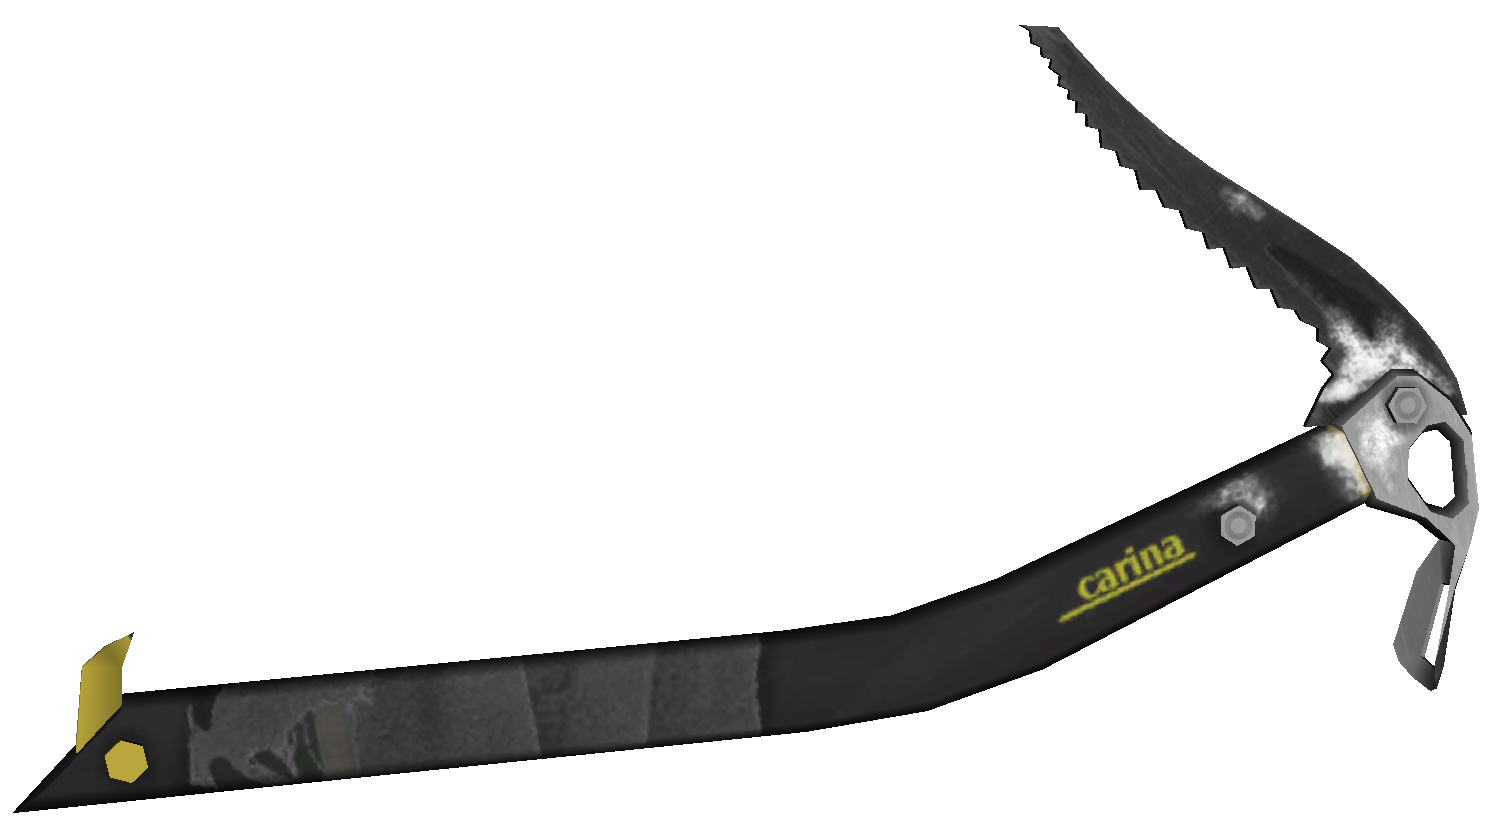 Glacier Photos Ice Axe PNG Image High Quality PNG Image